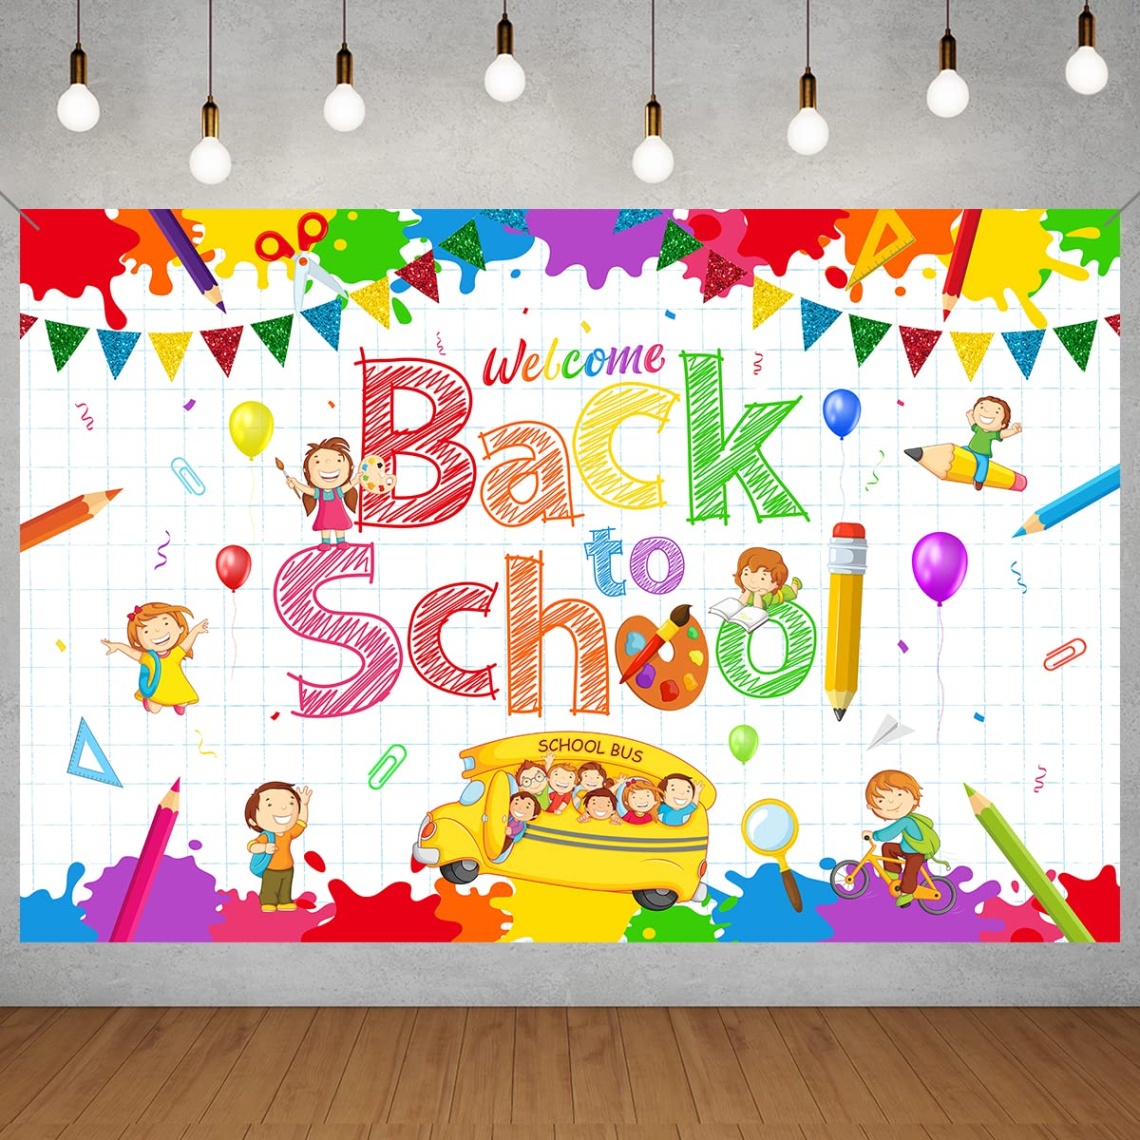 back to school decor Bulan 3 Welcome Back to School Decorations Back to School Background Banner Themed  Party First Day Classroom School Photo Background Props Celebration -  x